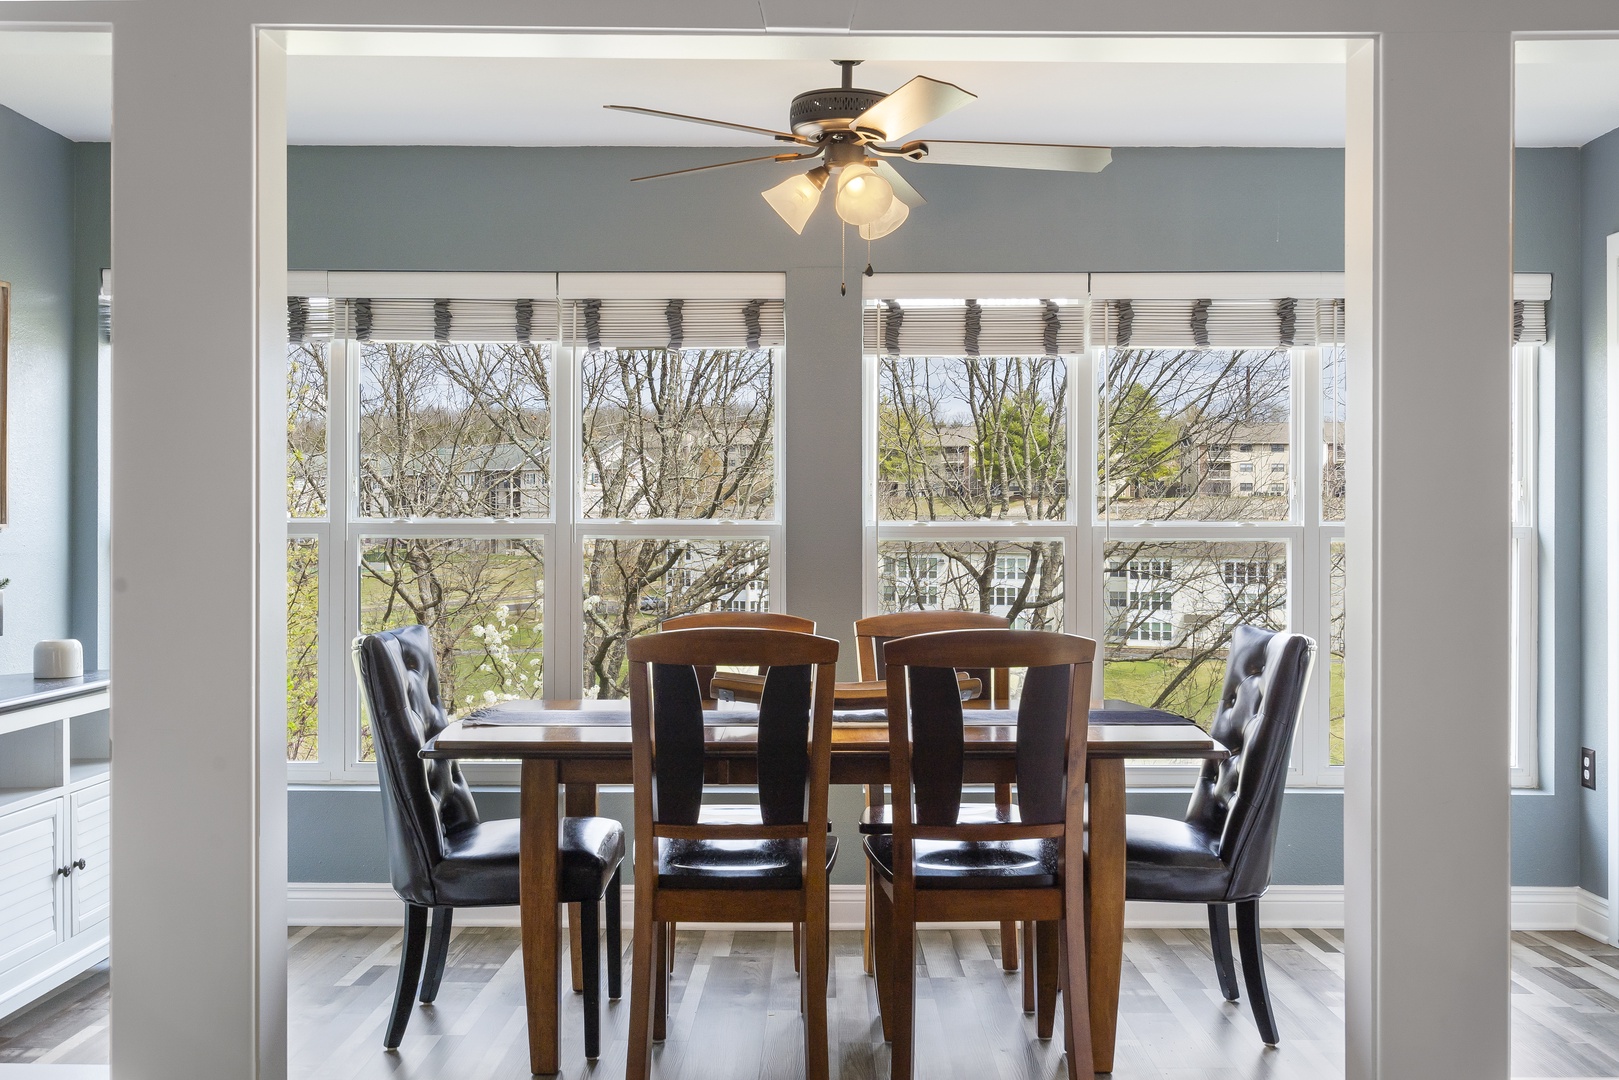 Gather for elegant meals together at the dining table, offering seating for 6